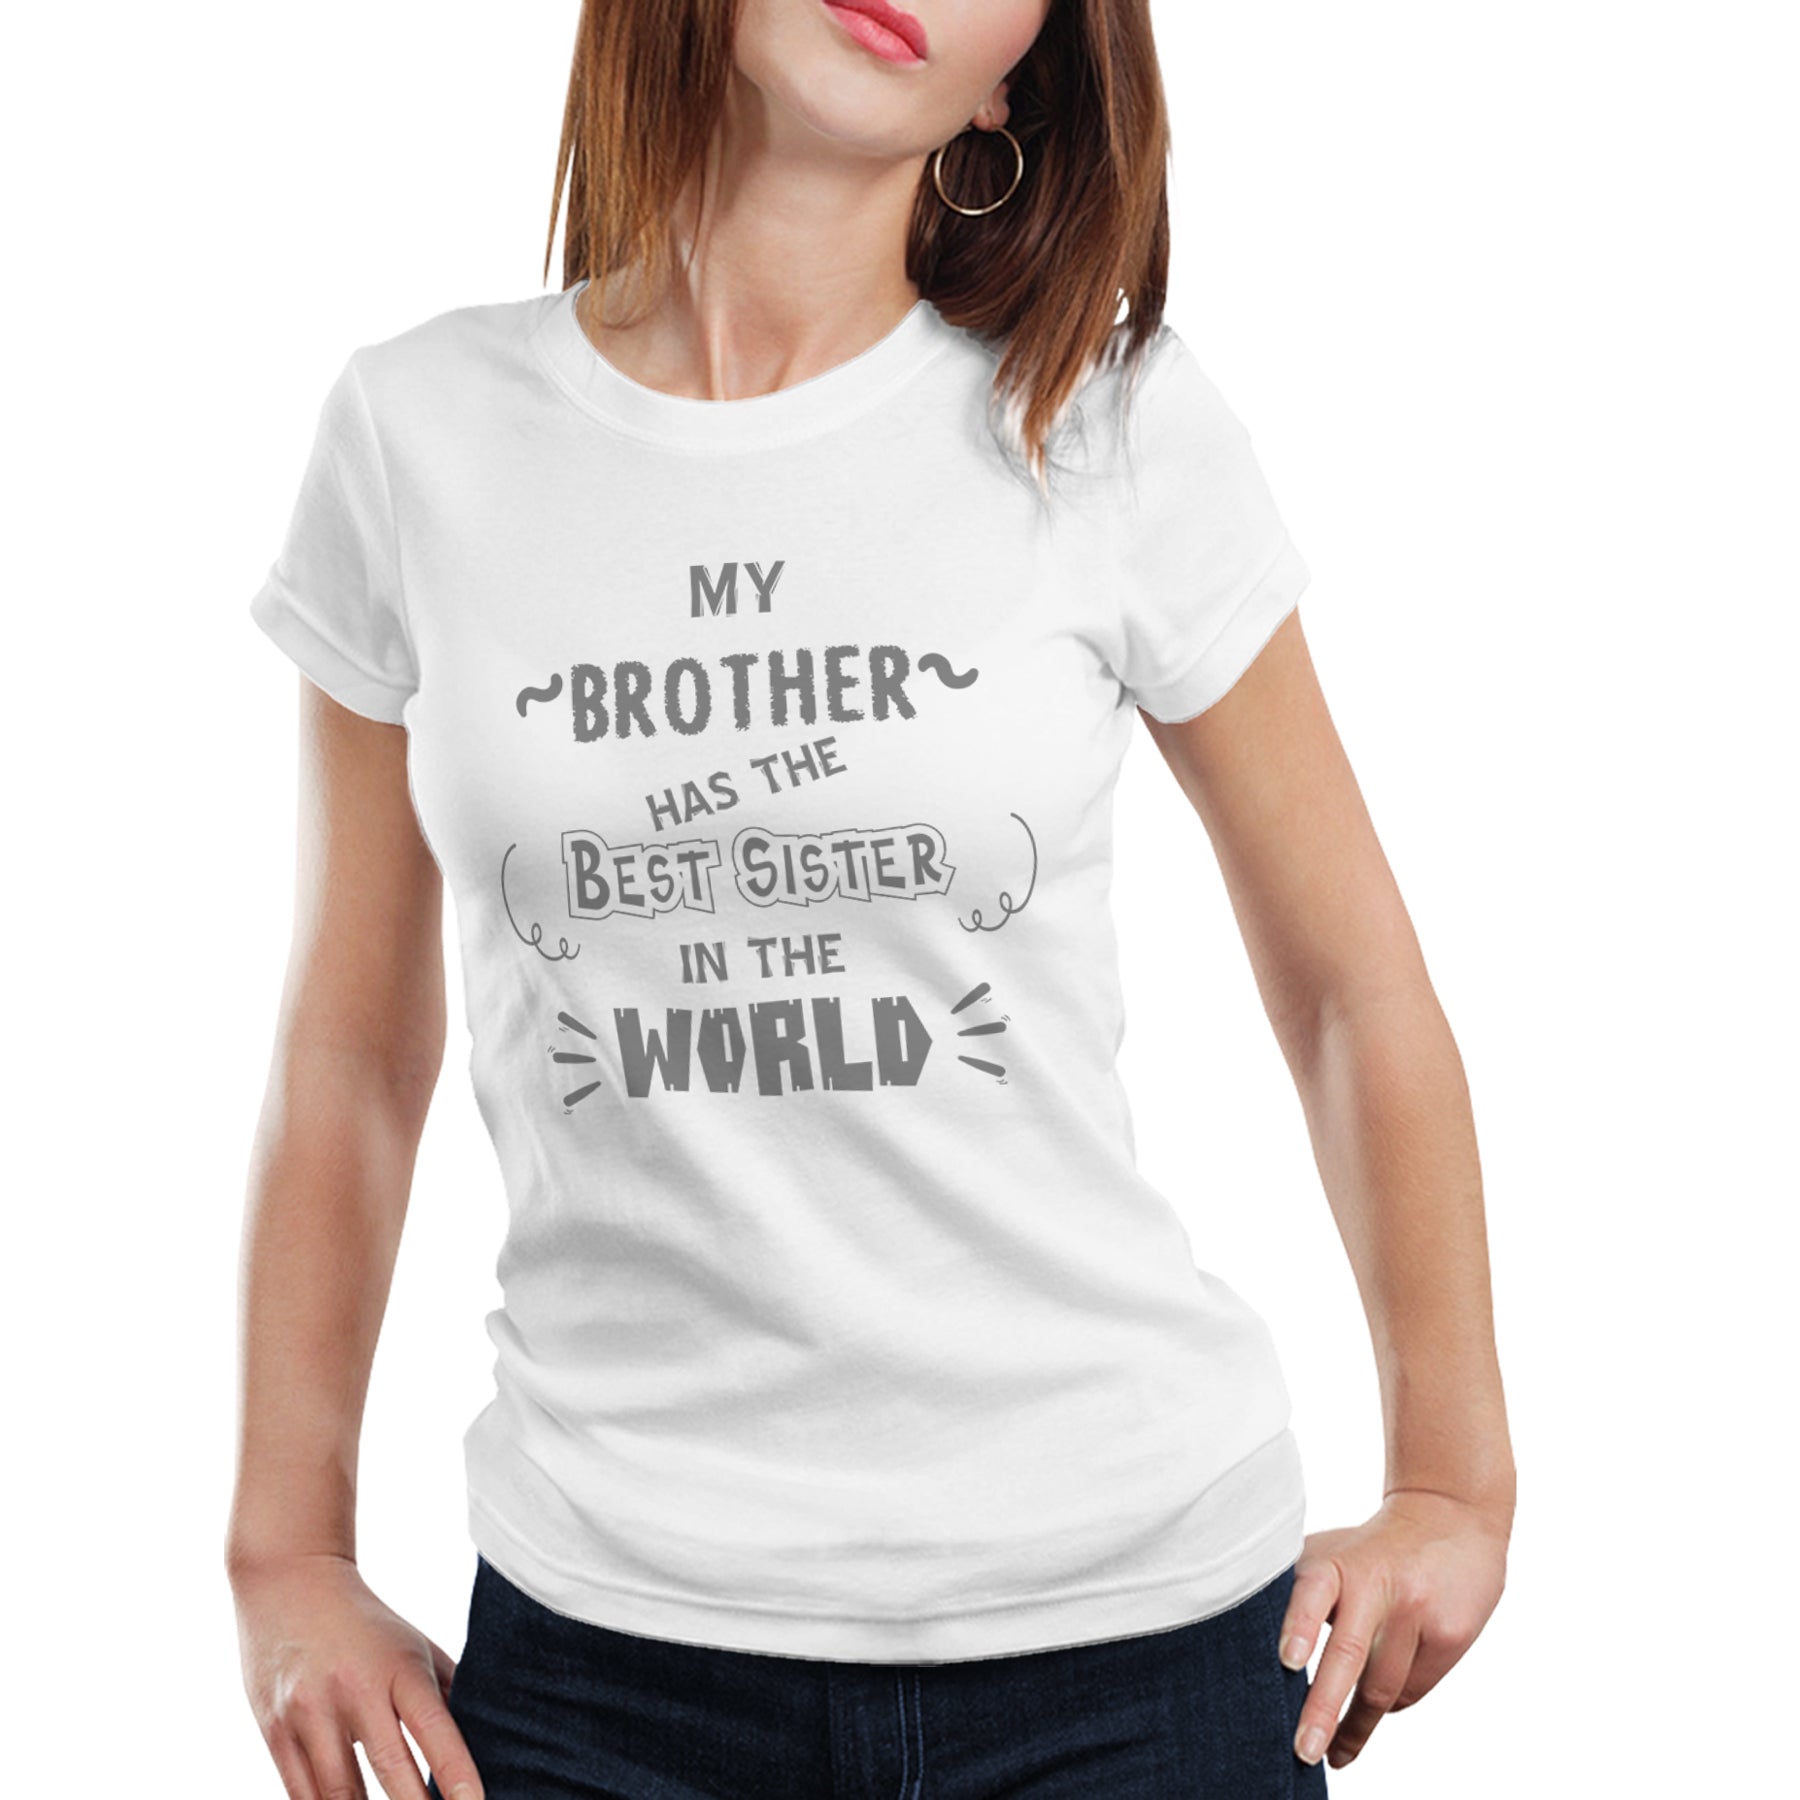 Best brother in the world- Best sister in the world matching Sibling t shirts - white